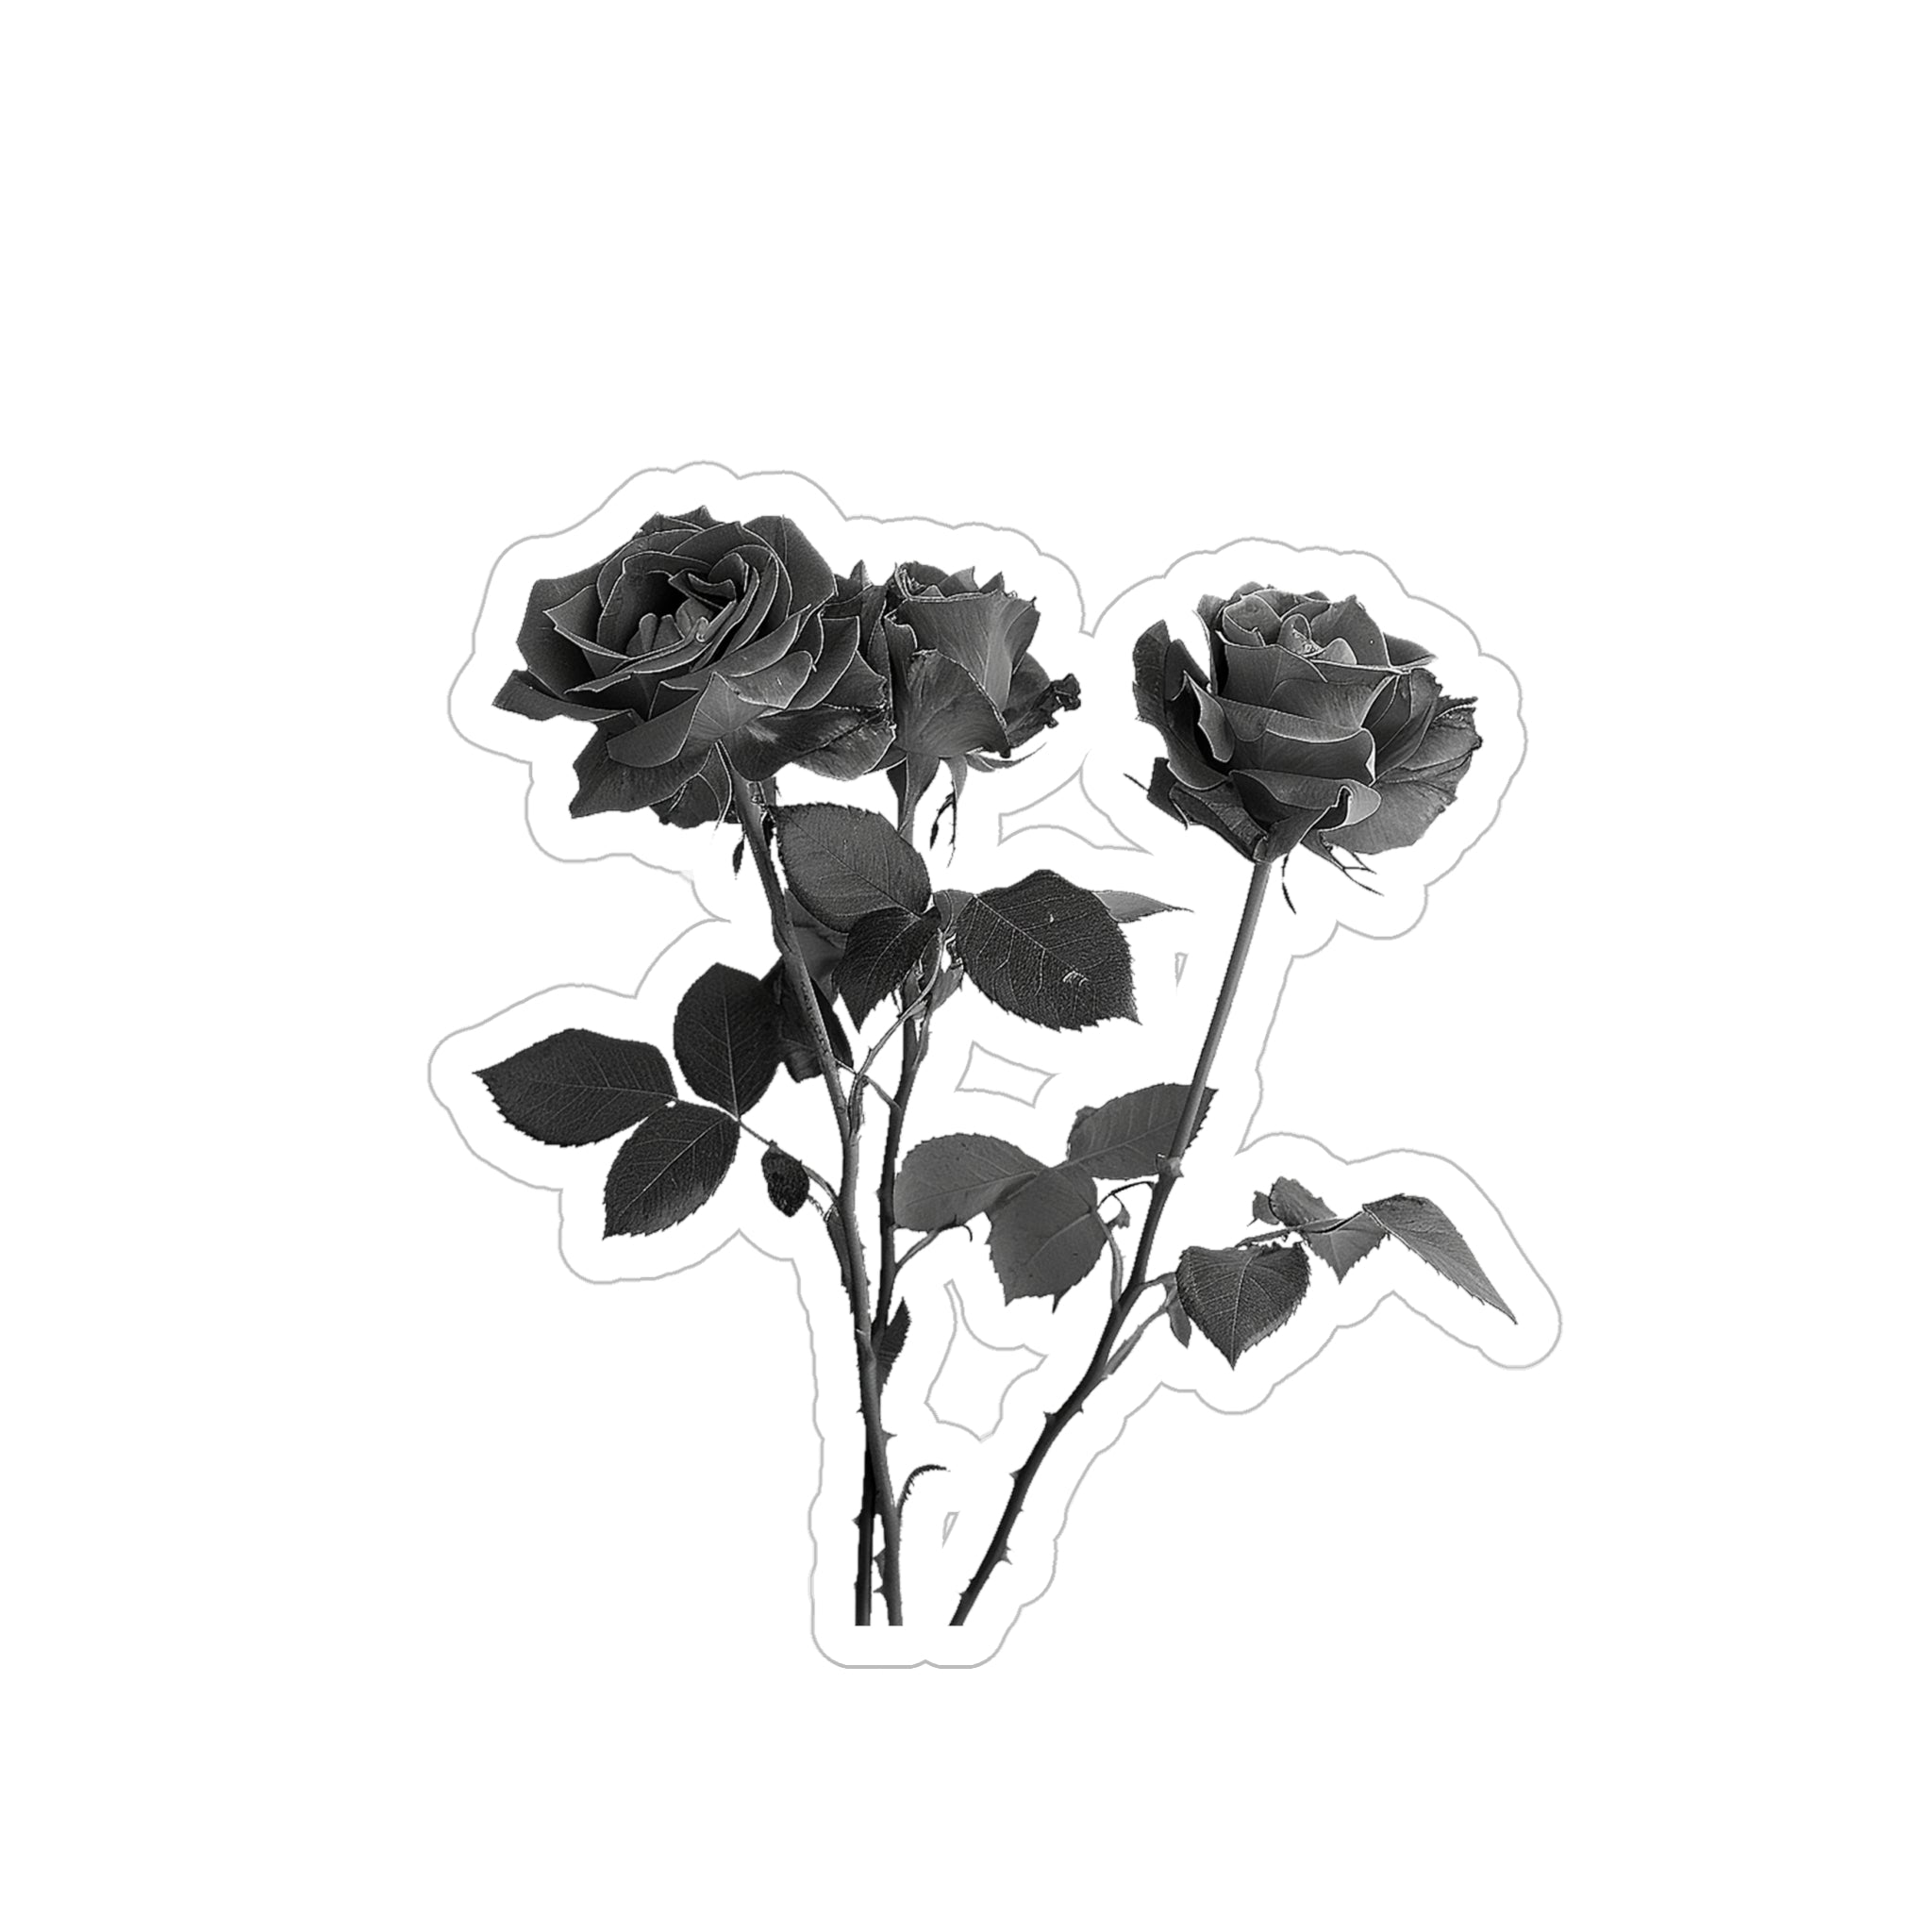 Black and white three roses die-cut transparent sticker, crafted from water-resistant vinyl. Available in 4 sizes for indoor and outdoor use. Personalize laptops, journals, cars, and more. Please note: Design may be difficult to see on dark surfaces, and small details may be cut as one shape. Assembled in the USA from globally sourced parts. Infuse your belongings with classic elegance and the captivating beauty of nature.